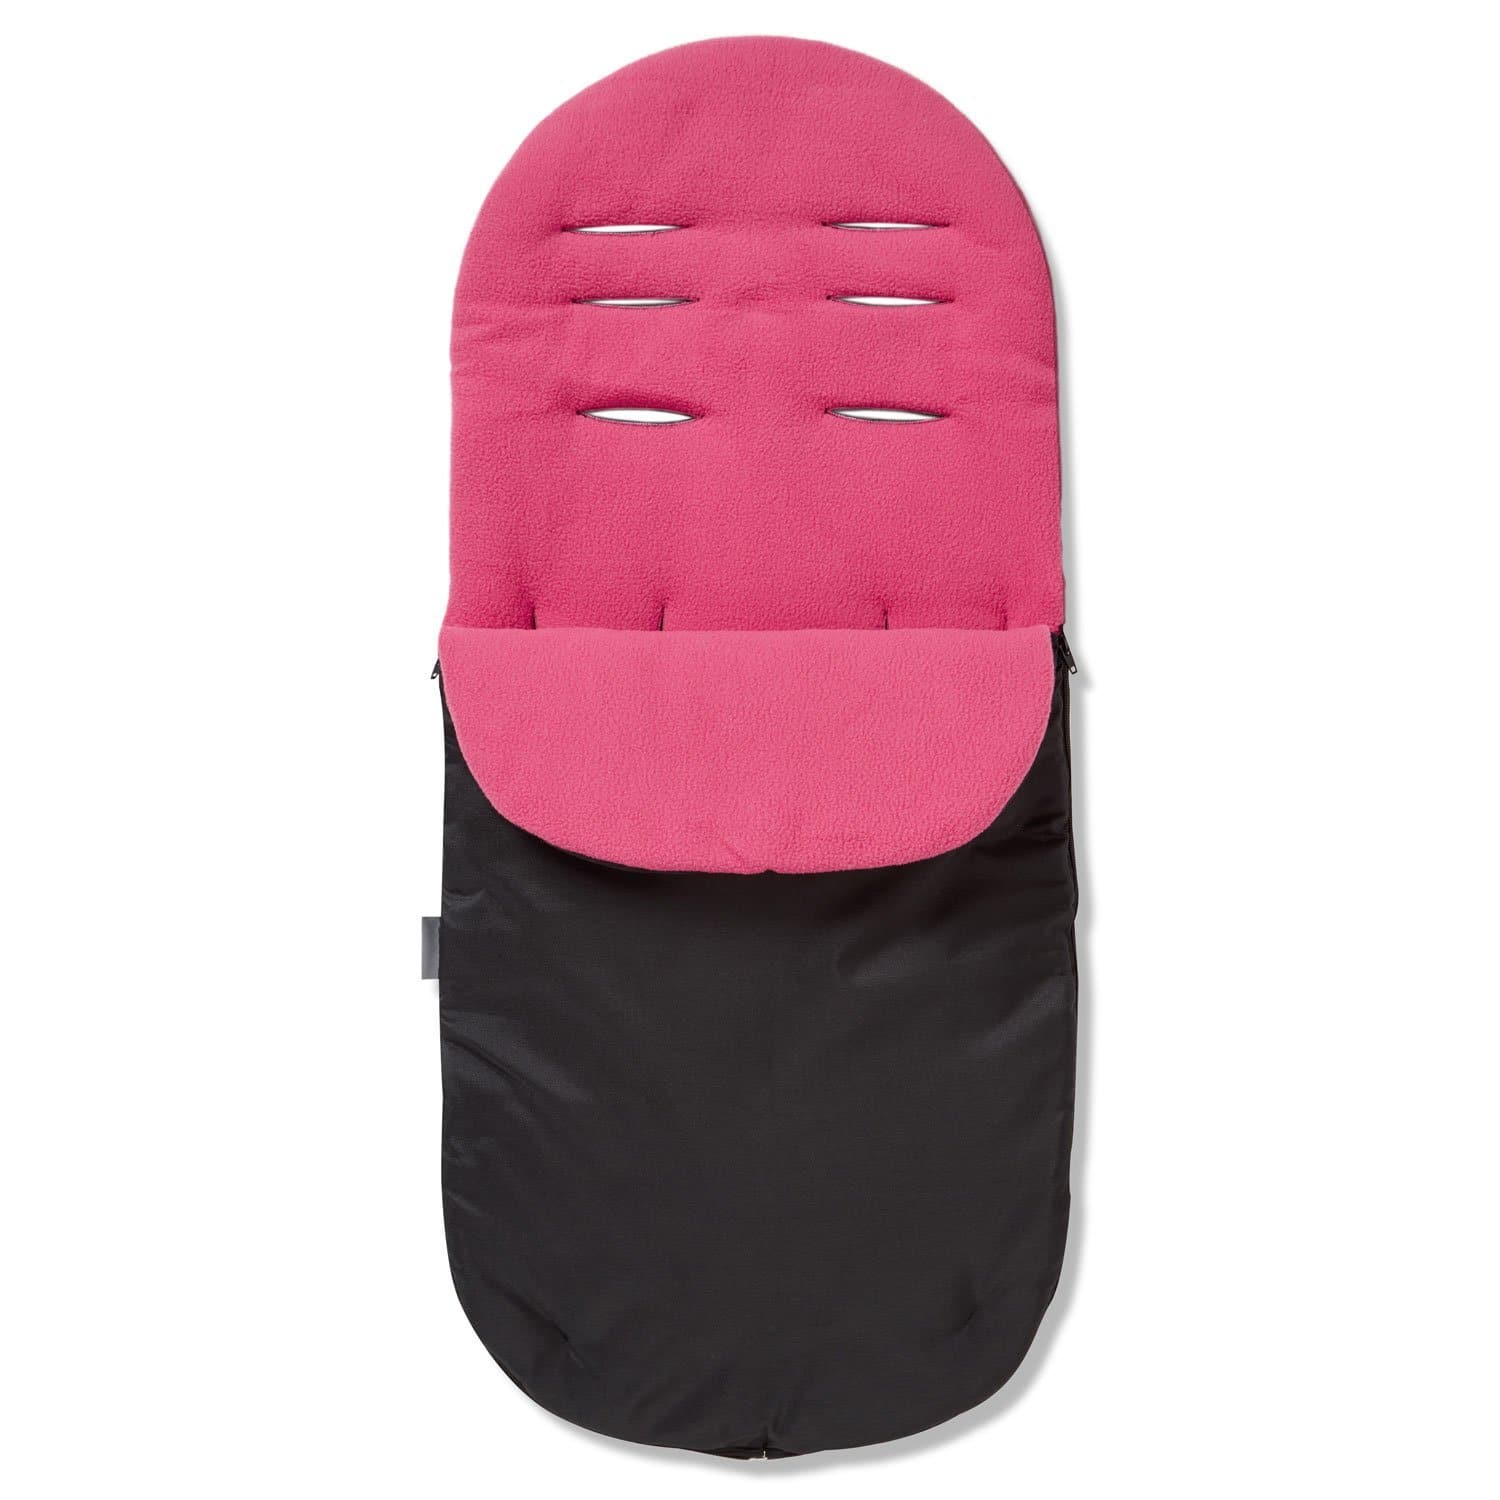 Footmuff / Cosy Toes Compatible with Concord - Dark Pink / Fits All Models | For Your Little One